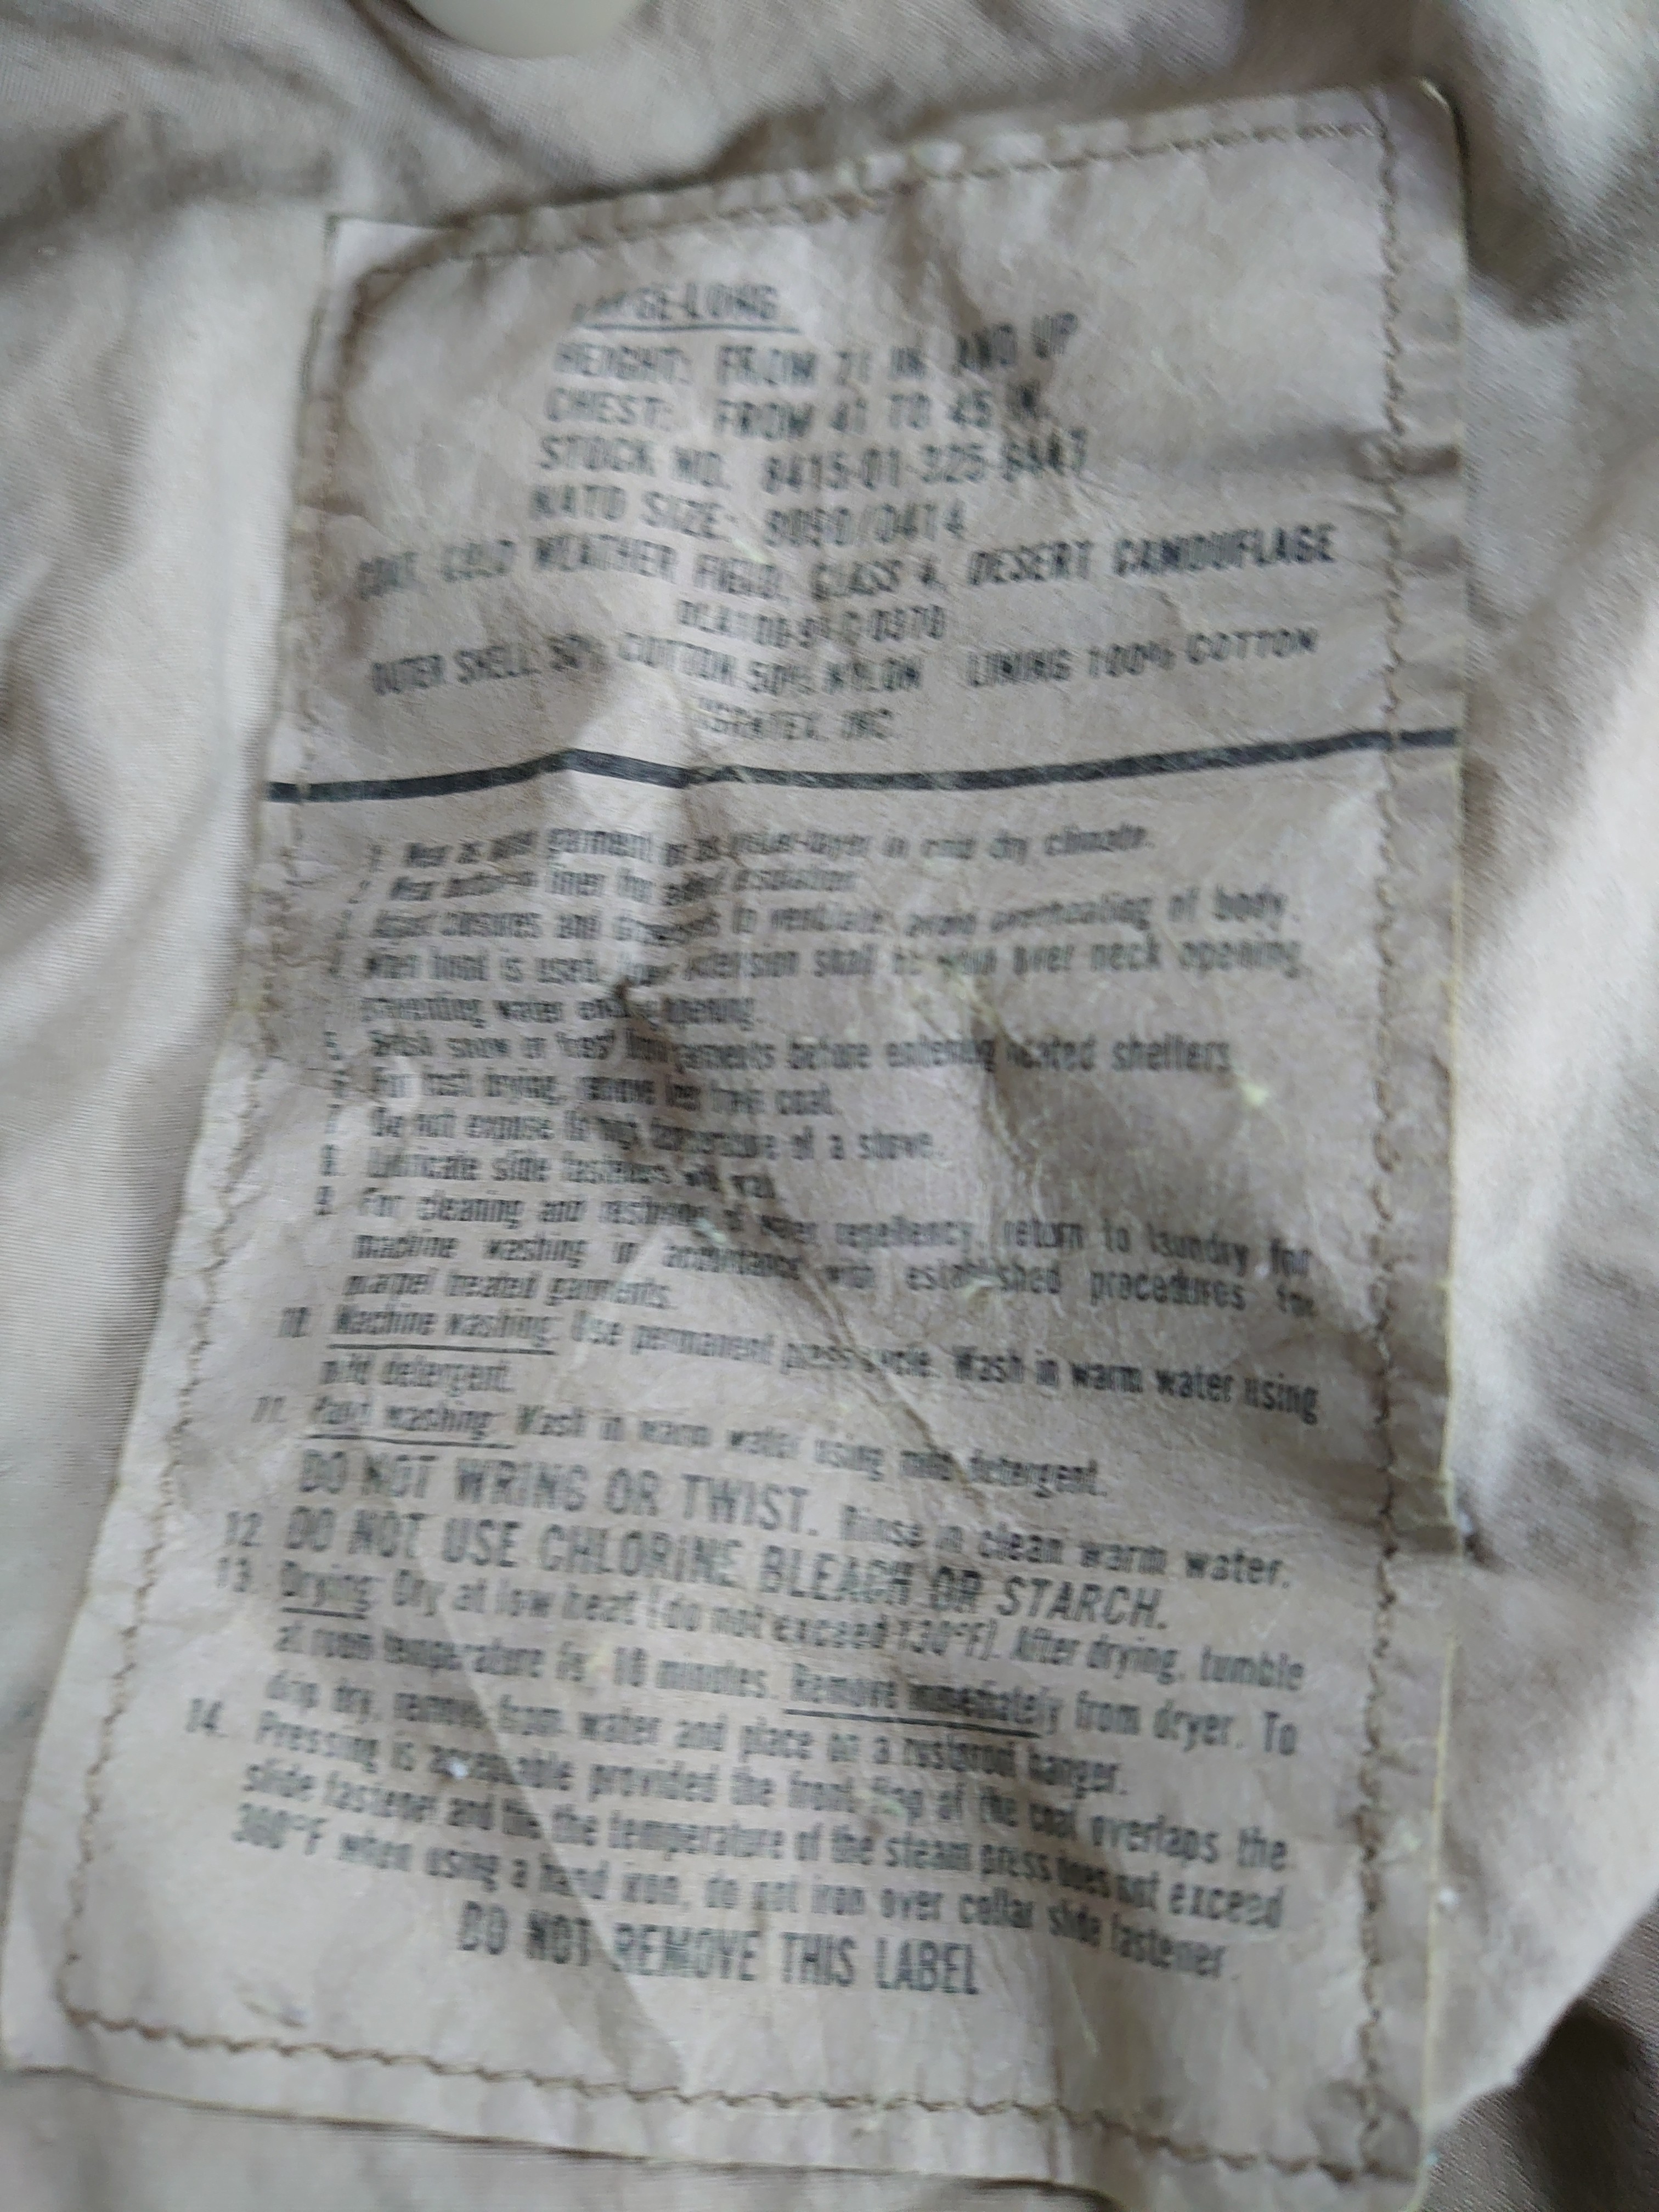 About genuine US ARMY M-65 field jacket | Vintage Leather Jackets Forum